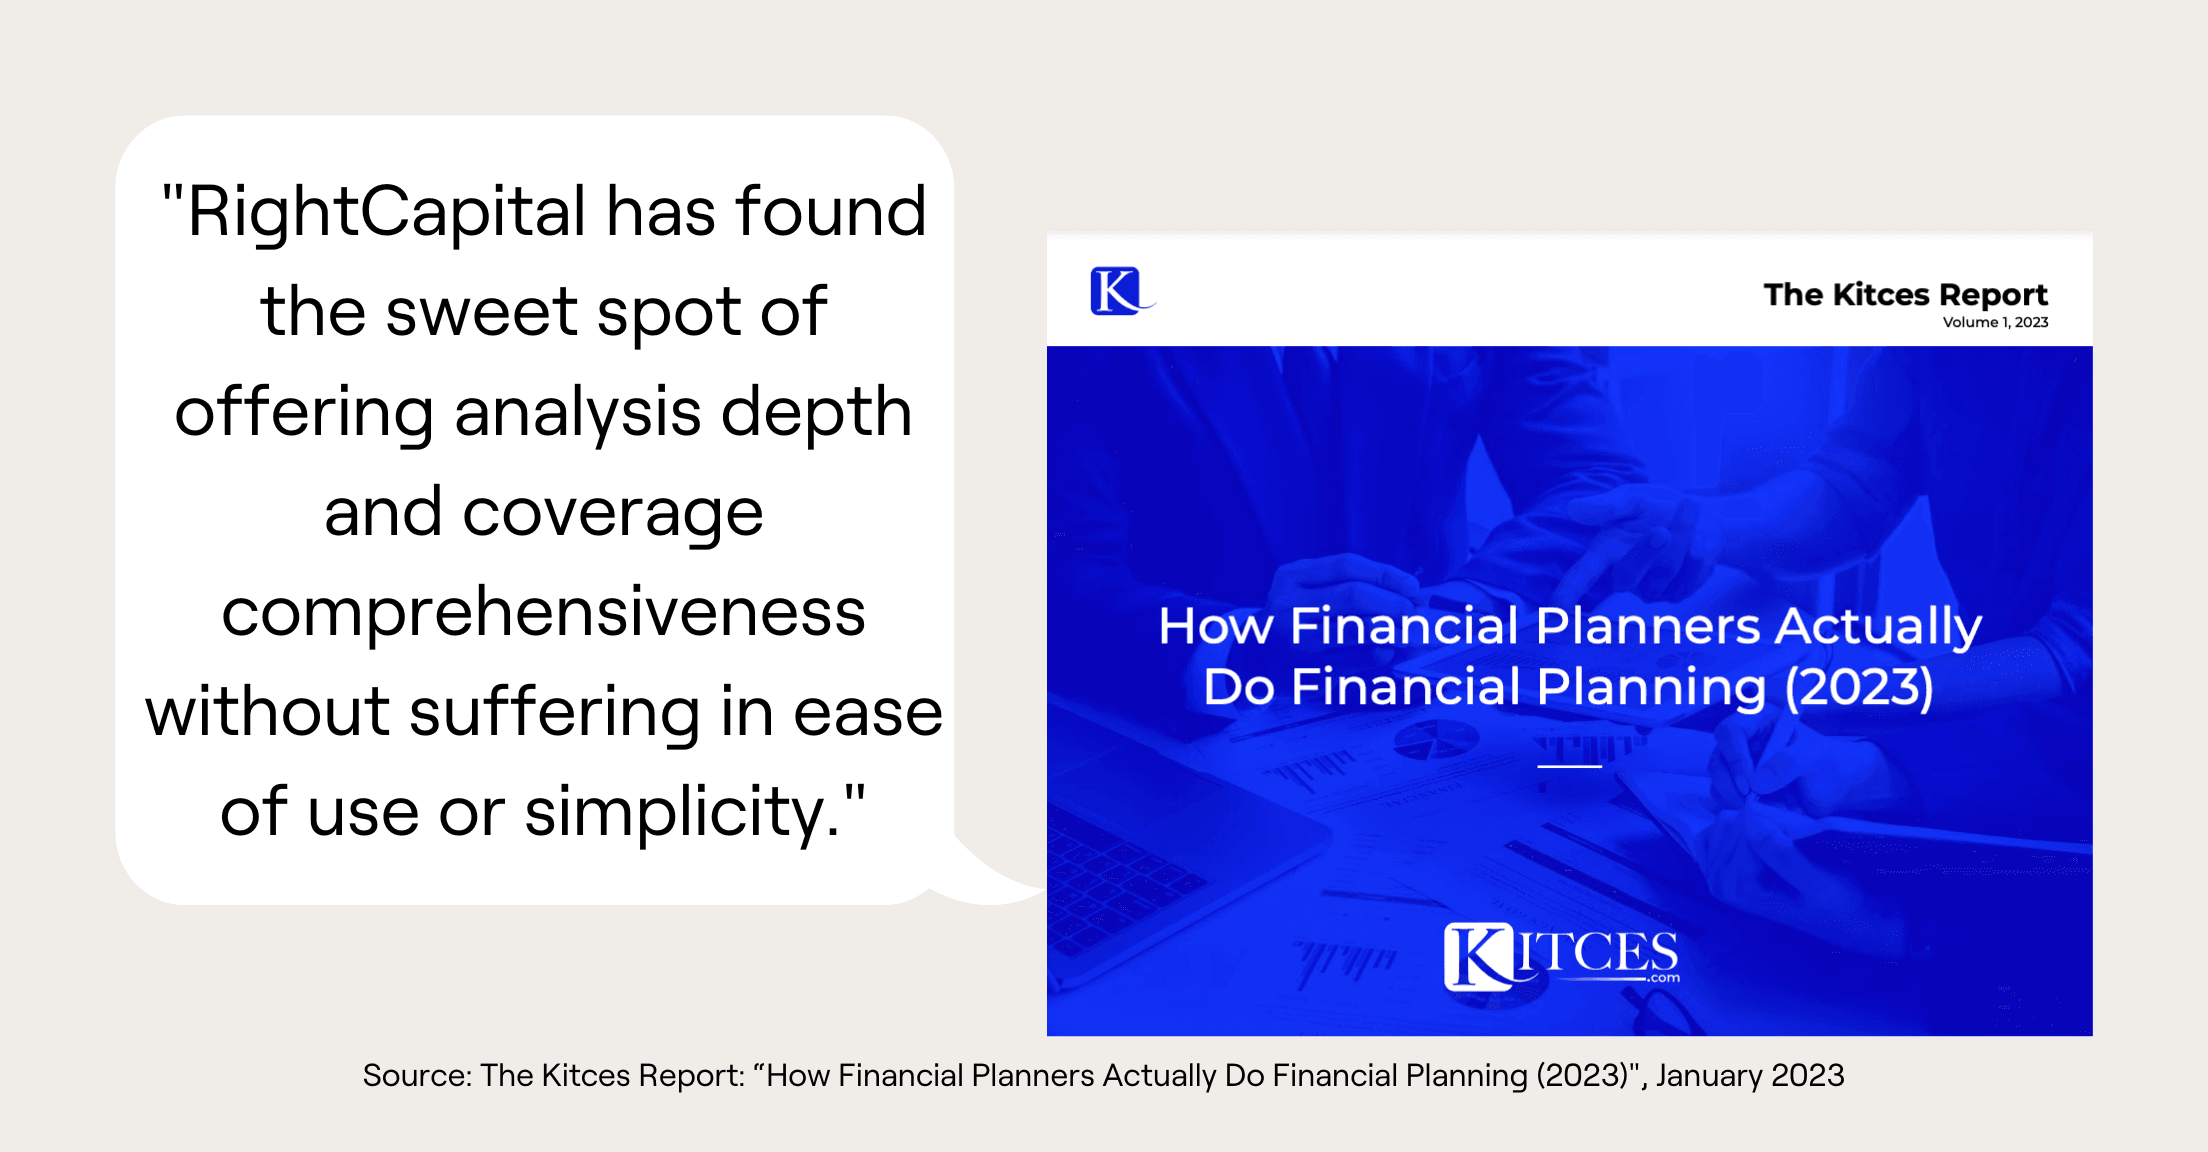 Quote from the Kitces Report saying, "RightCapital has found the sweet spot of offering analysis depth and coverage comprehensiveness without suffering in ease of use or simplicity."